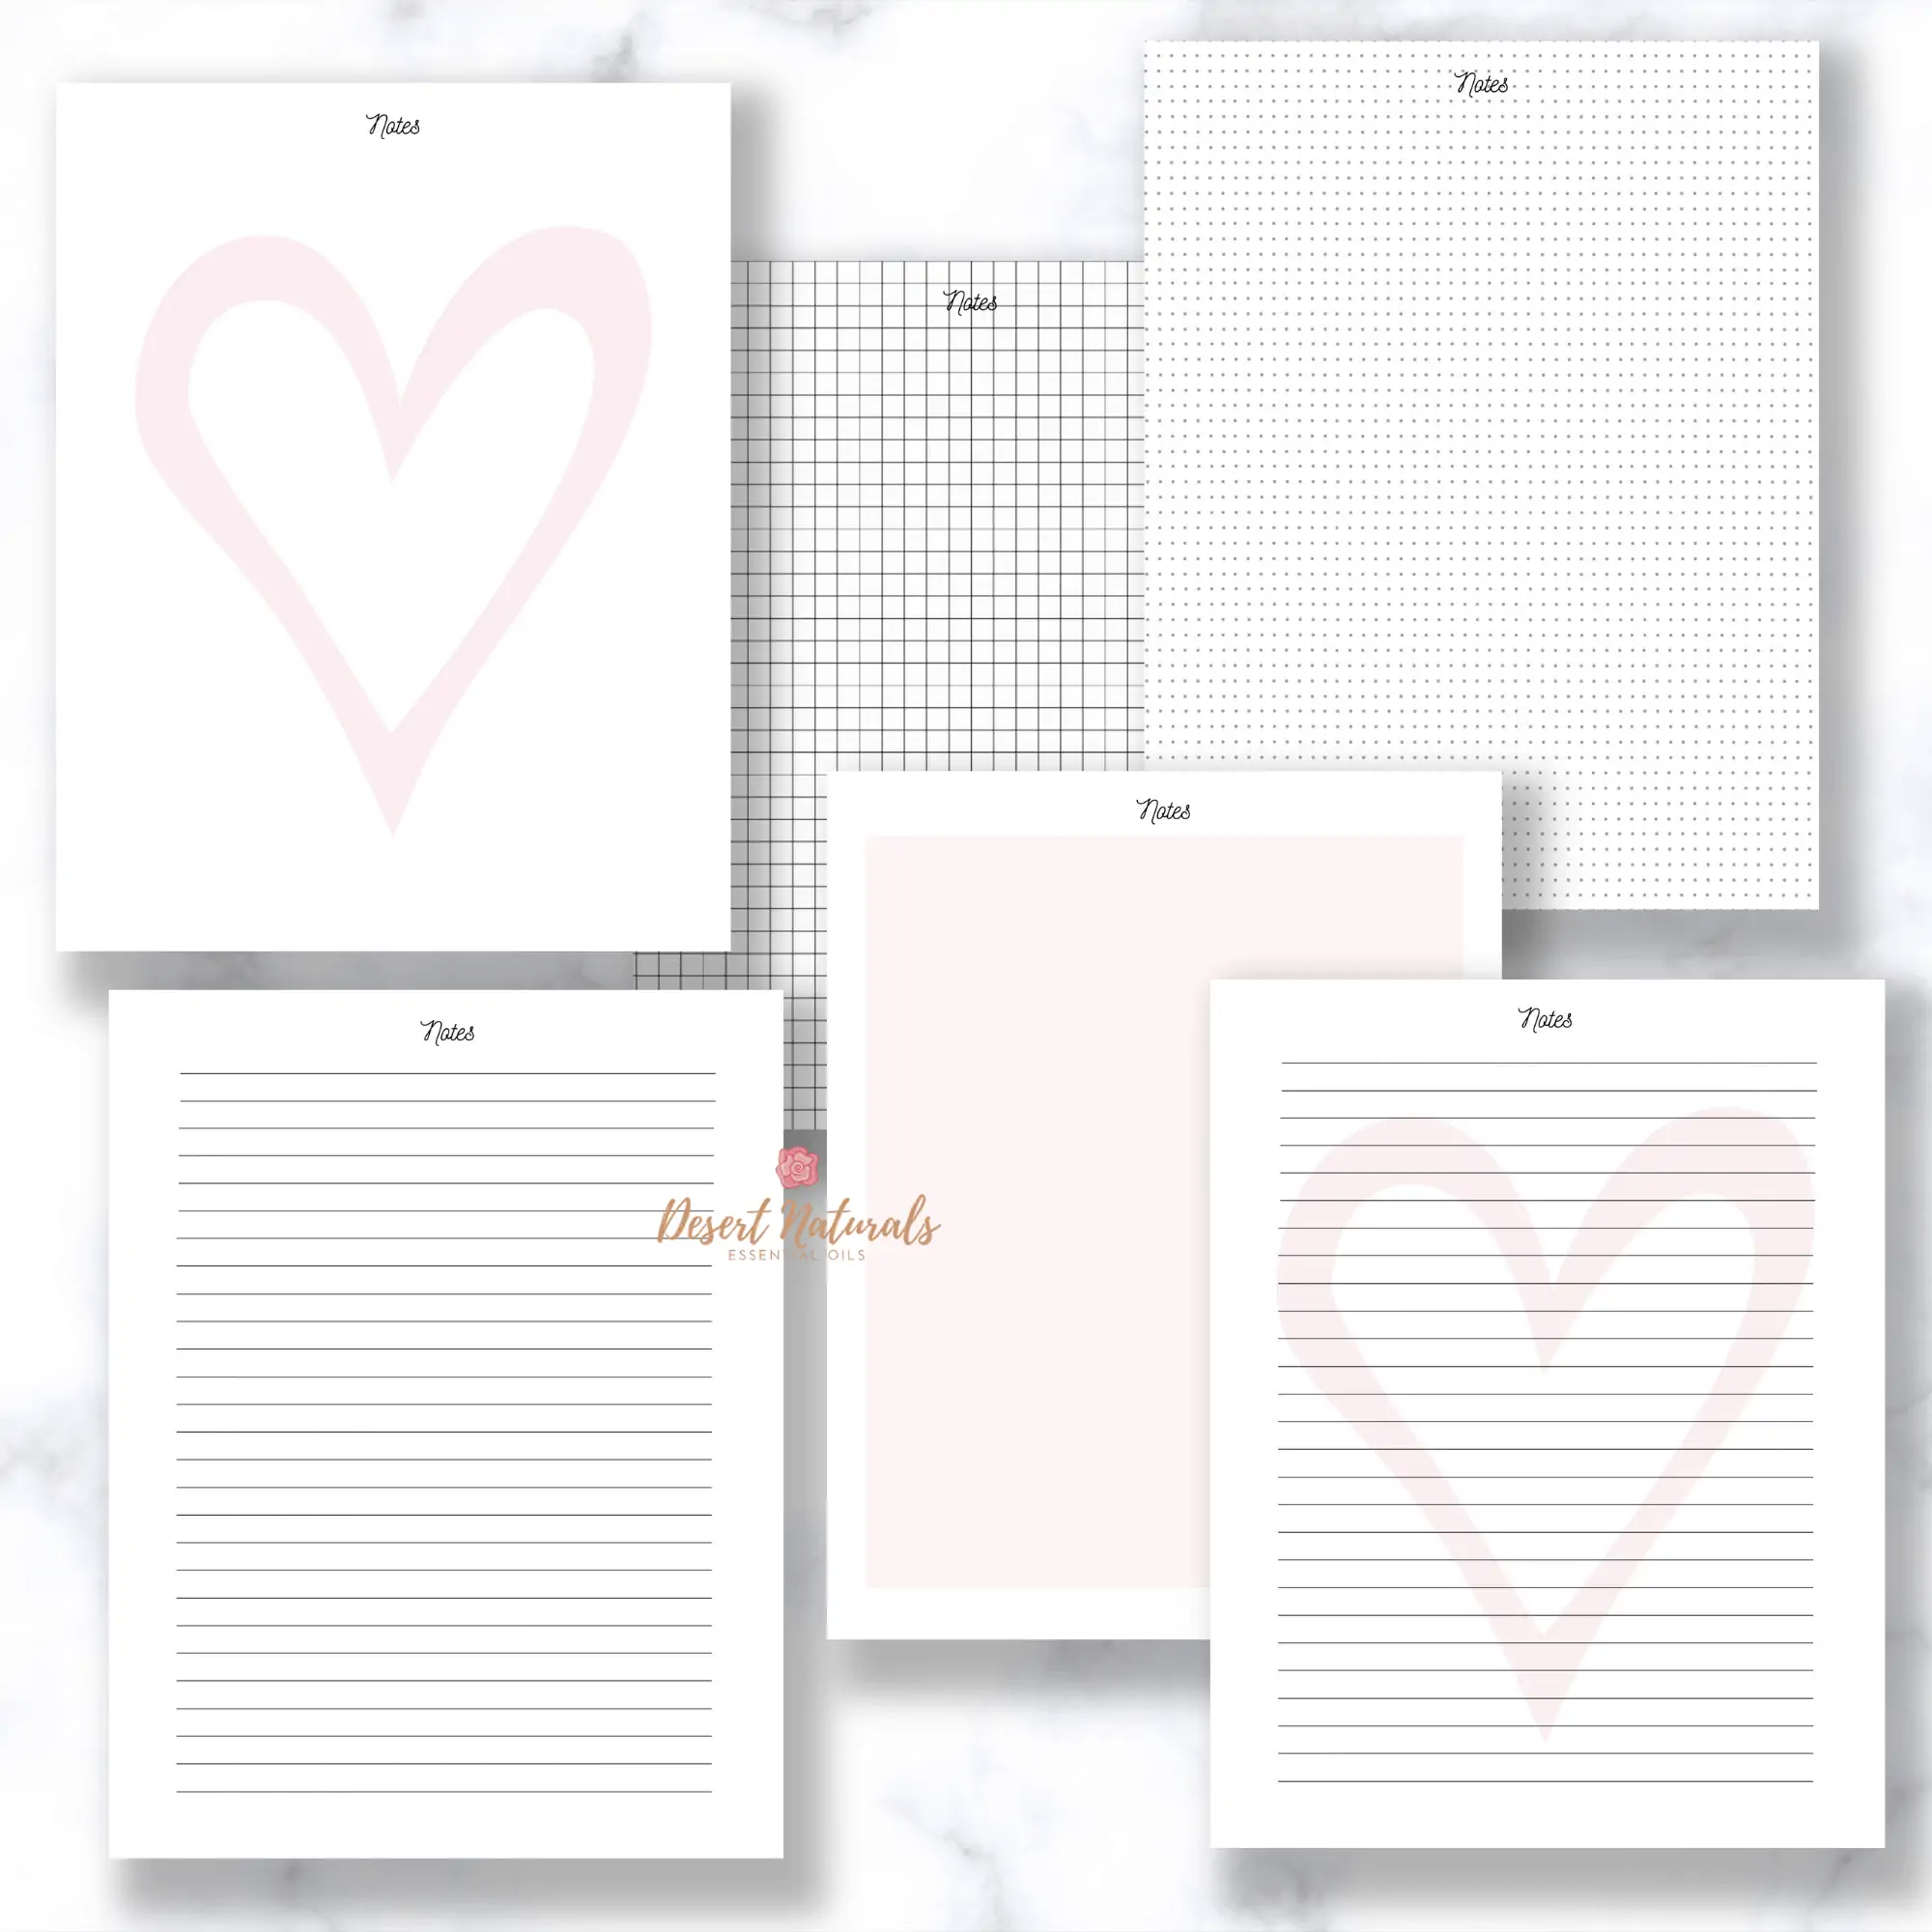 notes pages from the doterra essential oil business binder